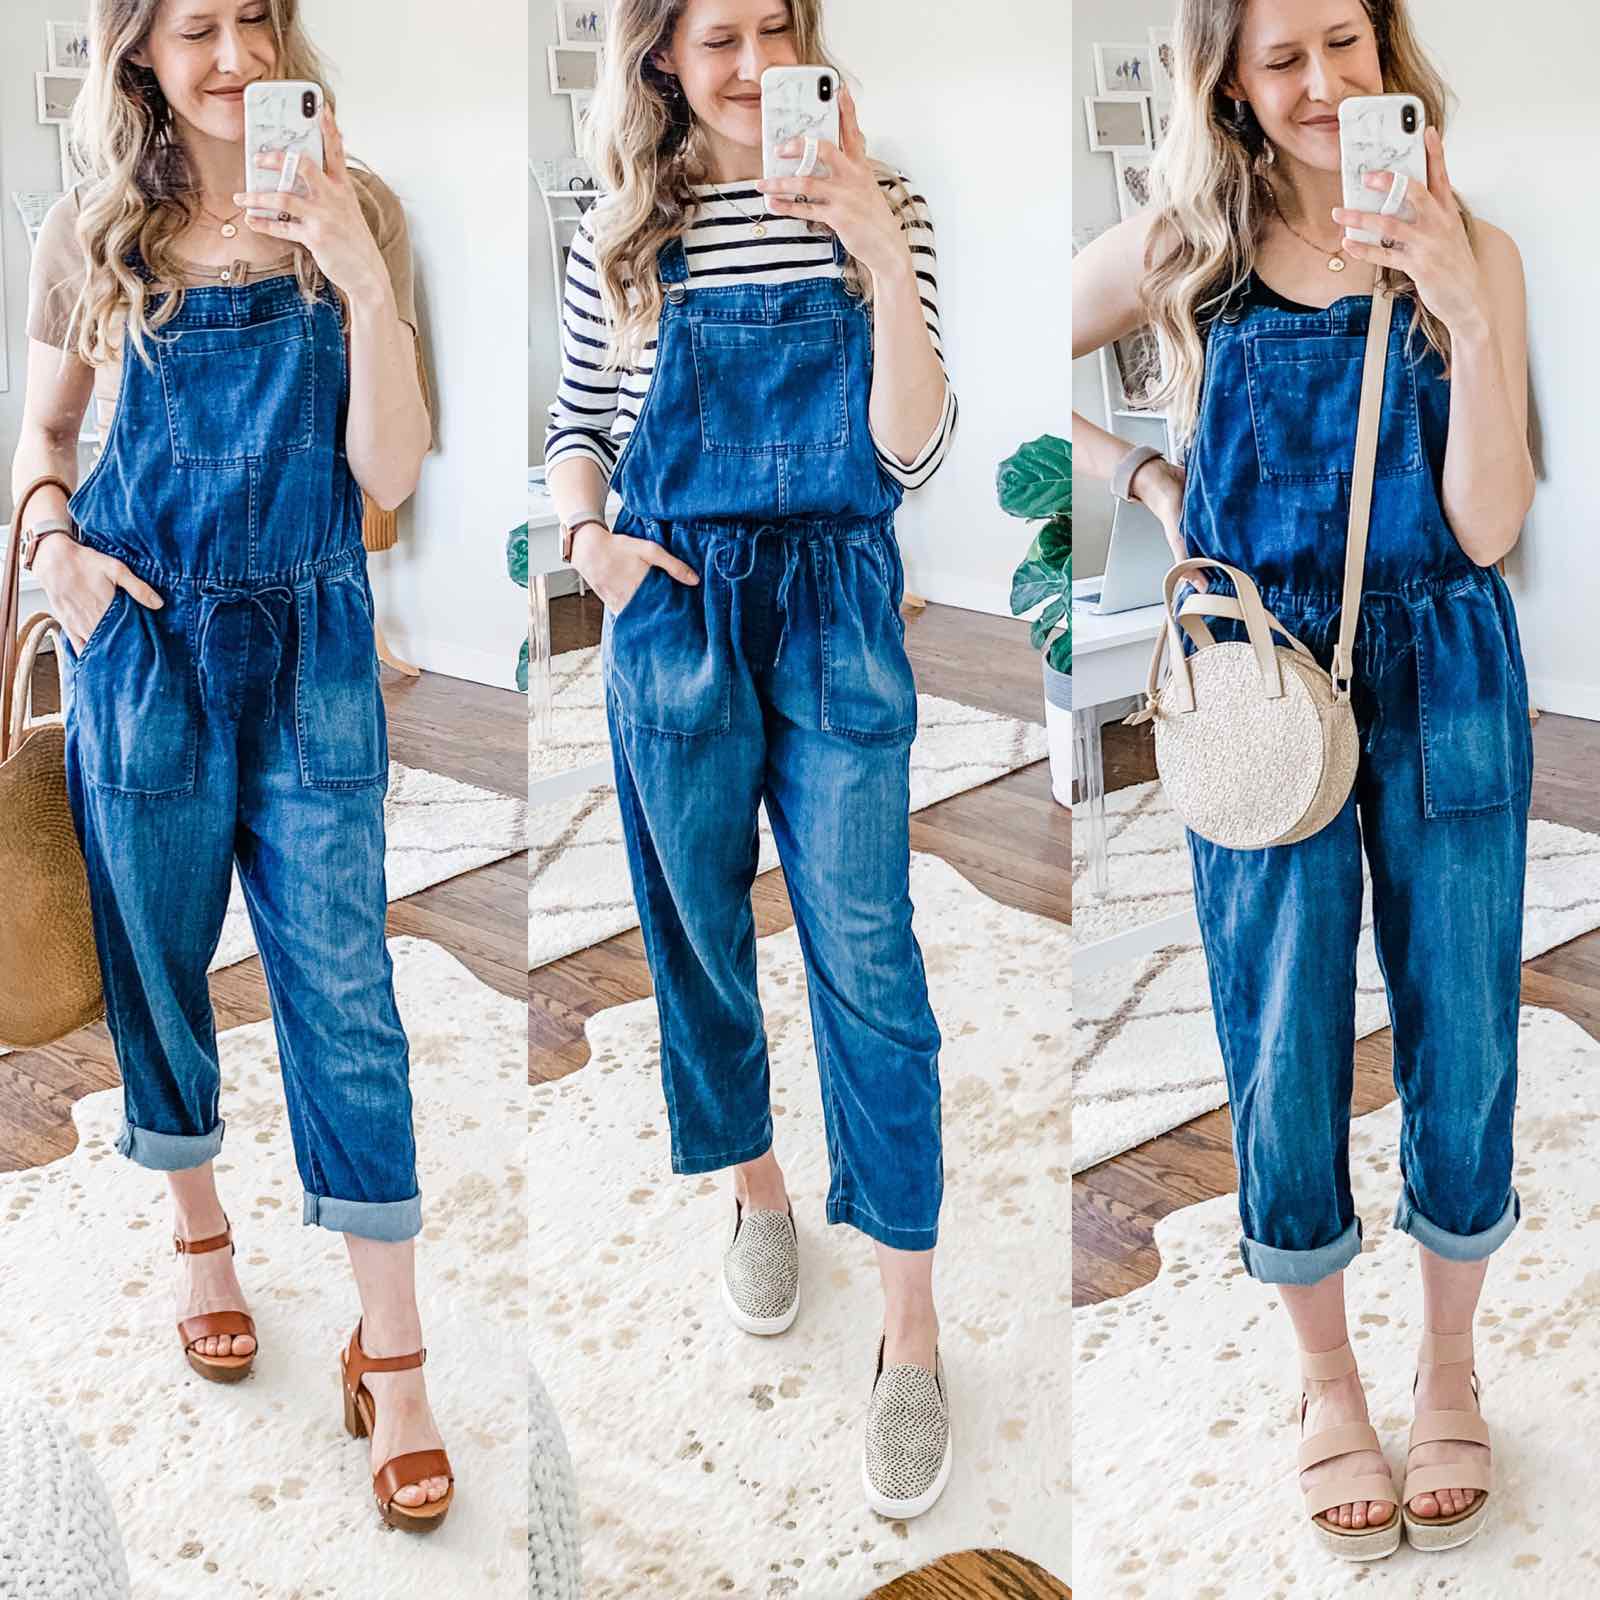 Love these overalls! $29 at Walmart